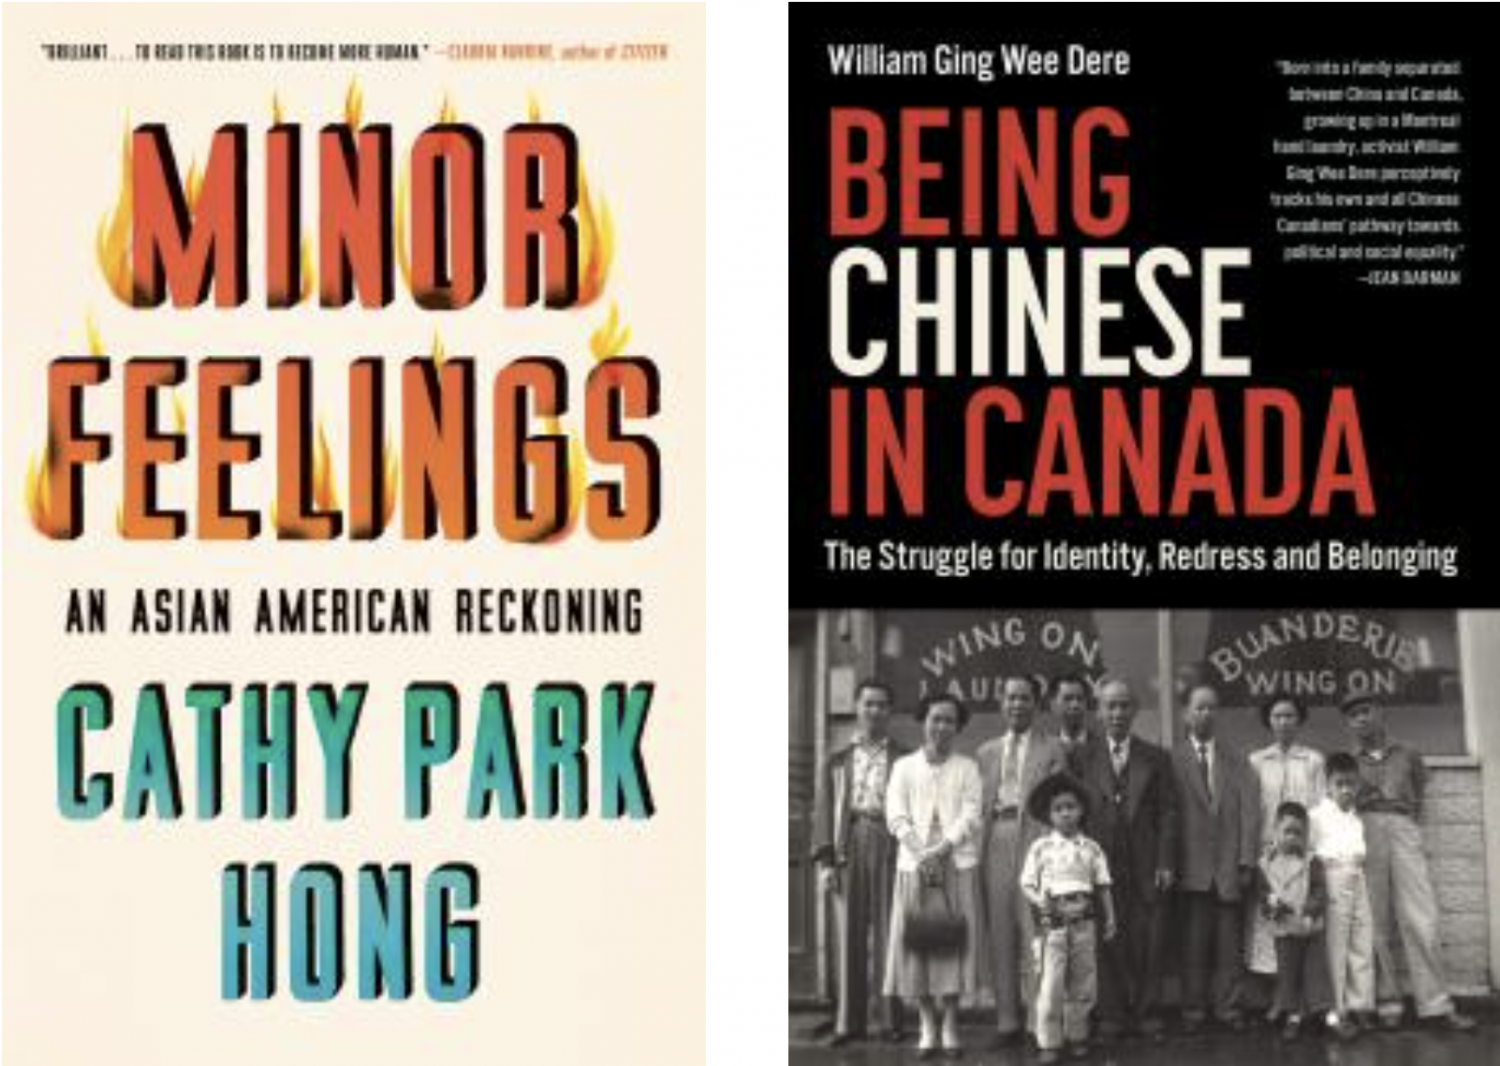 Books, organizations, podcasts and more, to celebrate Asian voices and educate on anti-Asian racism and history in Canada.